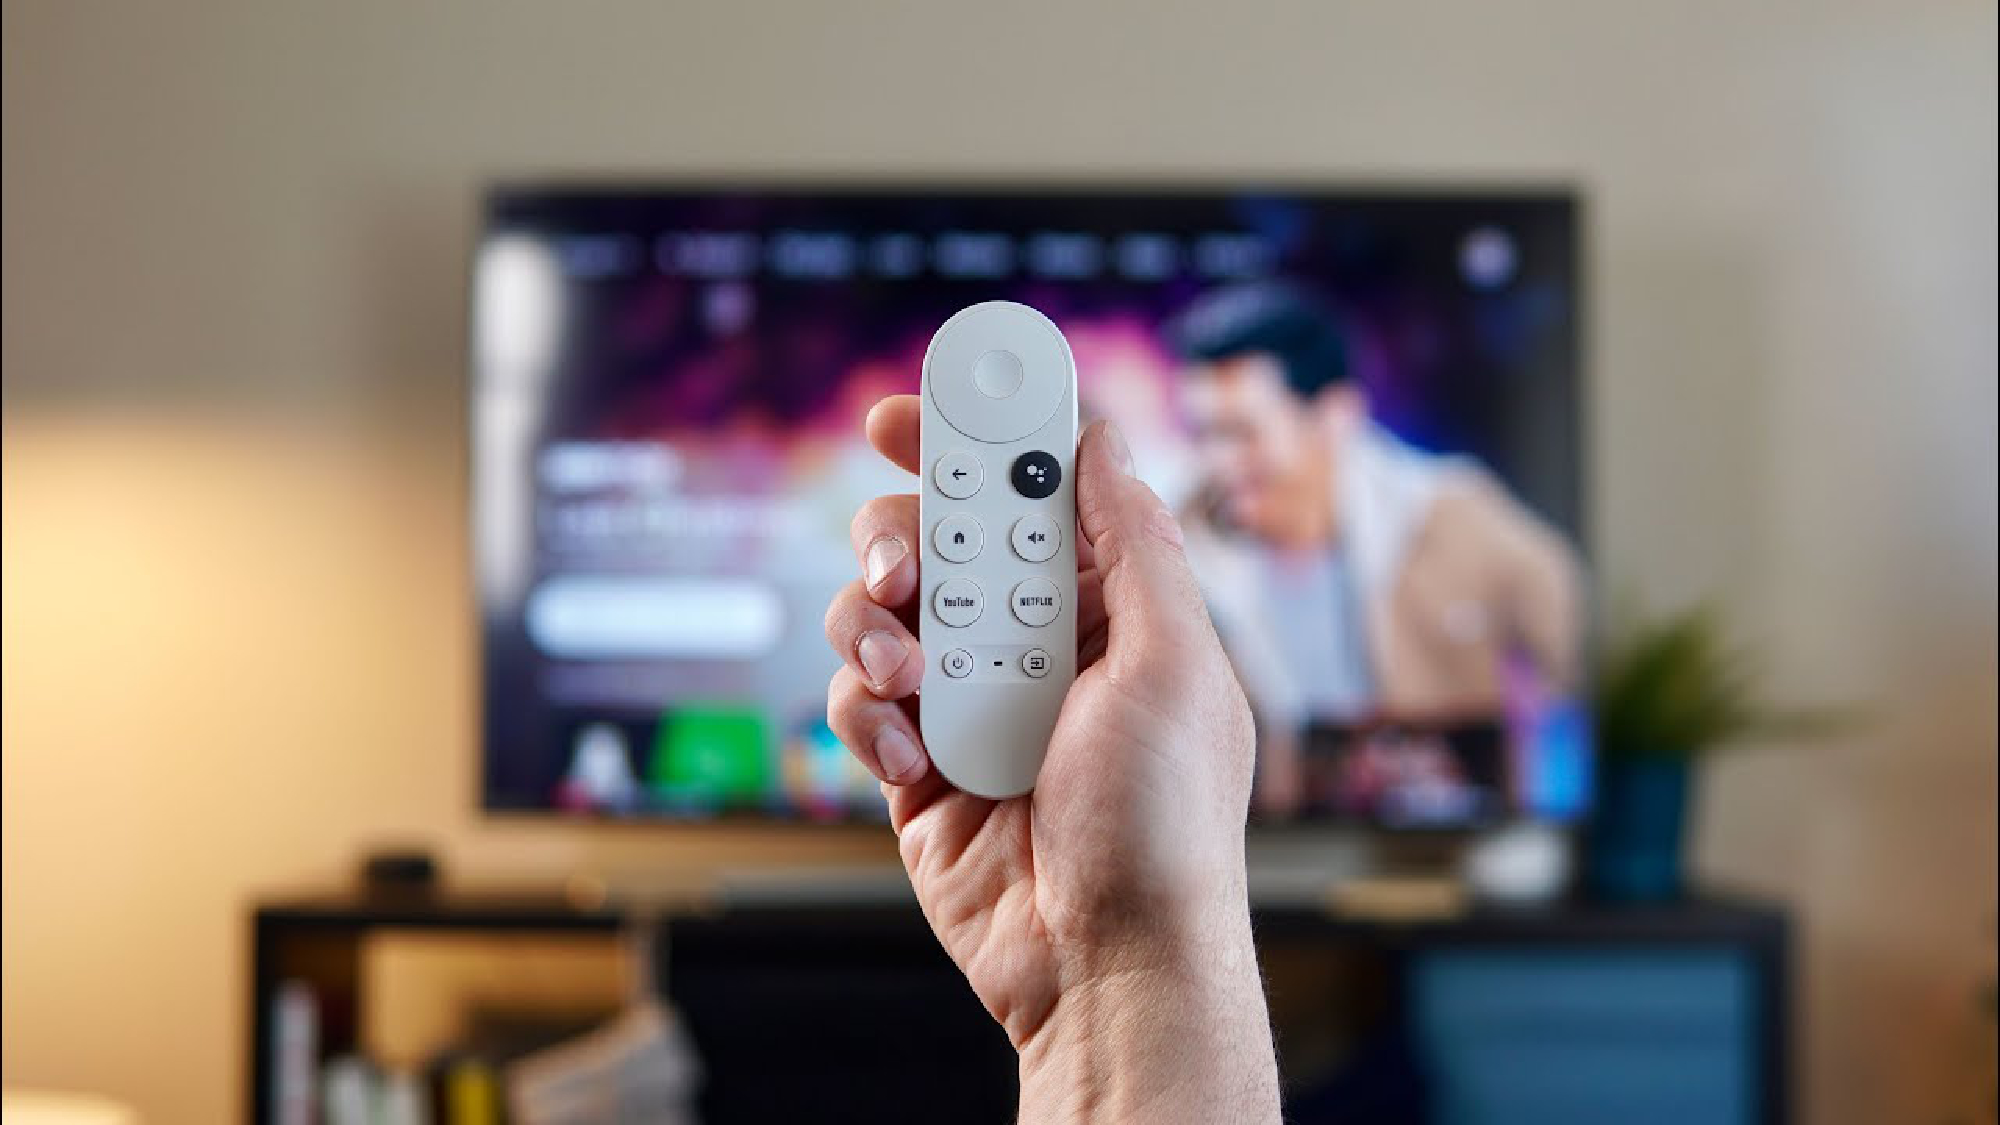 Google TV Adds Over 10 New Free Channels, Brings Total to 132